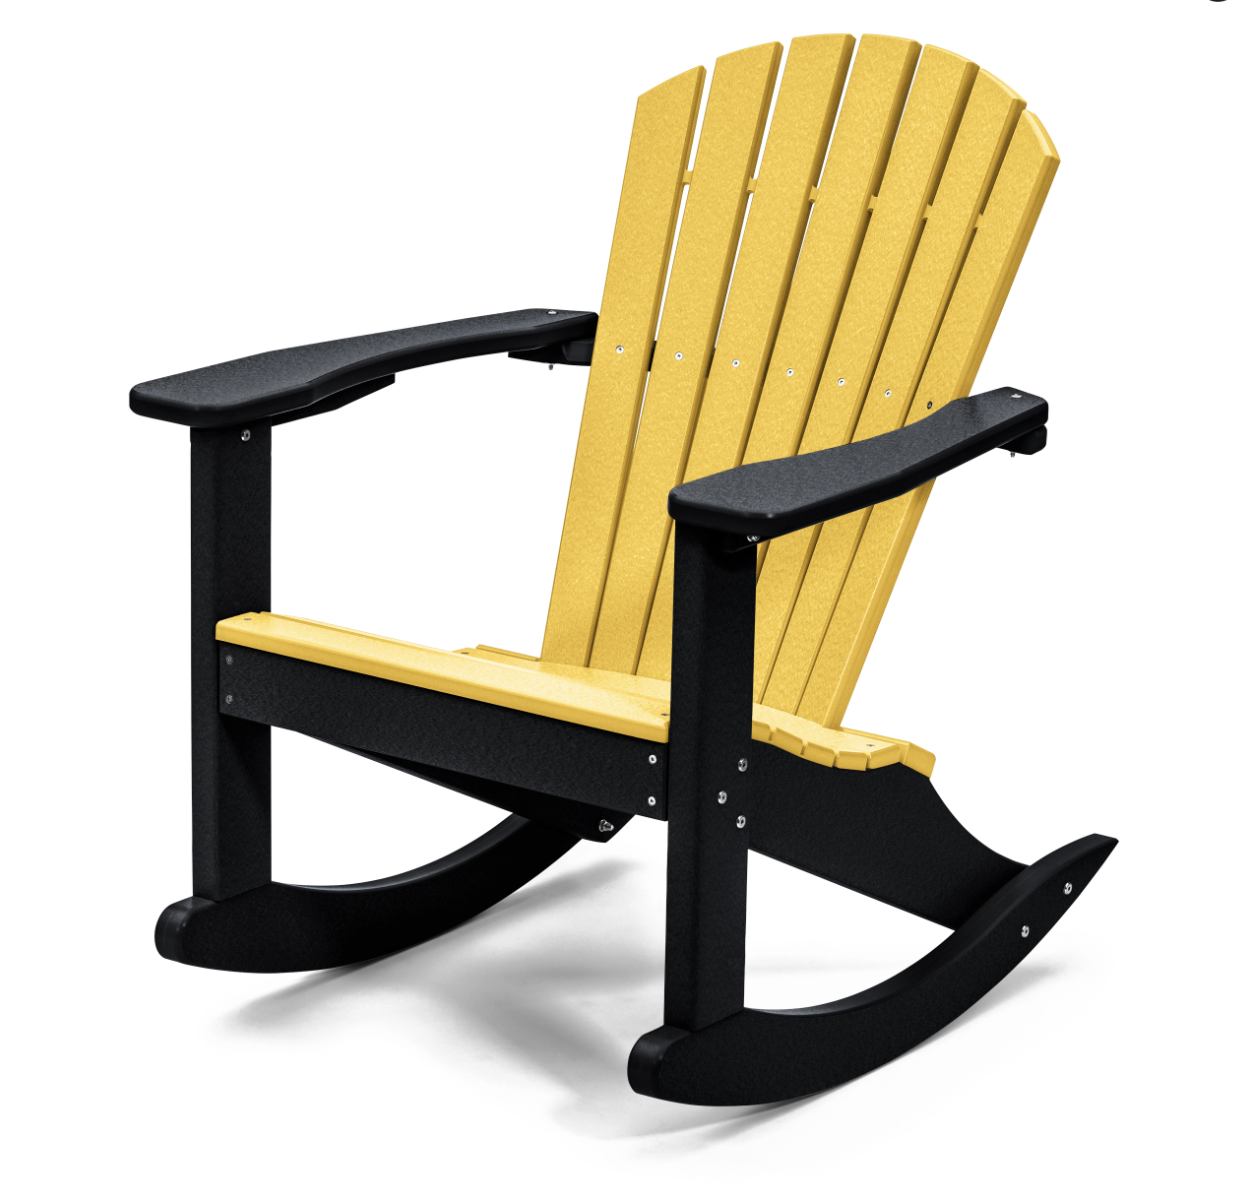 Perfect Choice Furniture Recycled Plastic Classic Adirondack Rocking Chair - LEAD TIME TO SHIP 4 WEEKS OR LESS